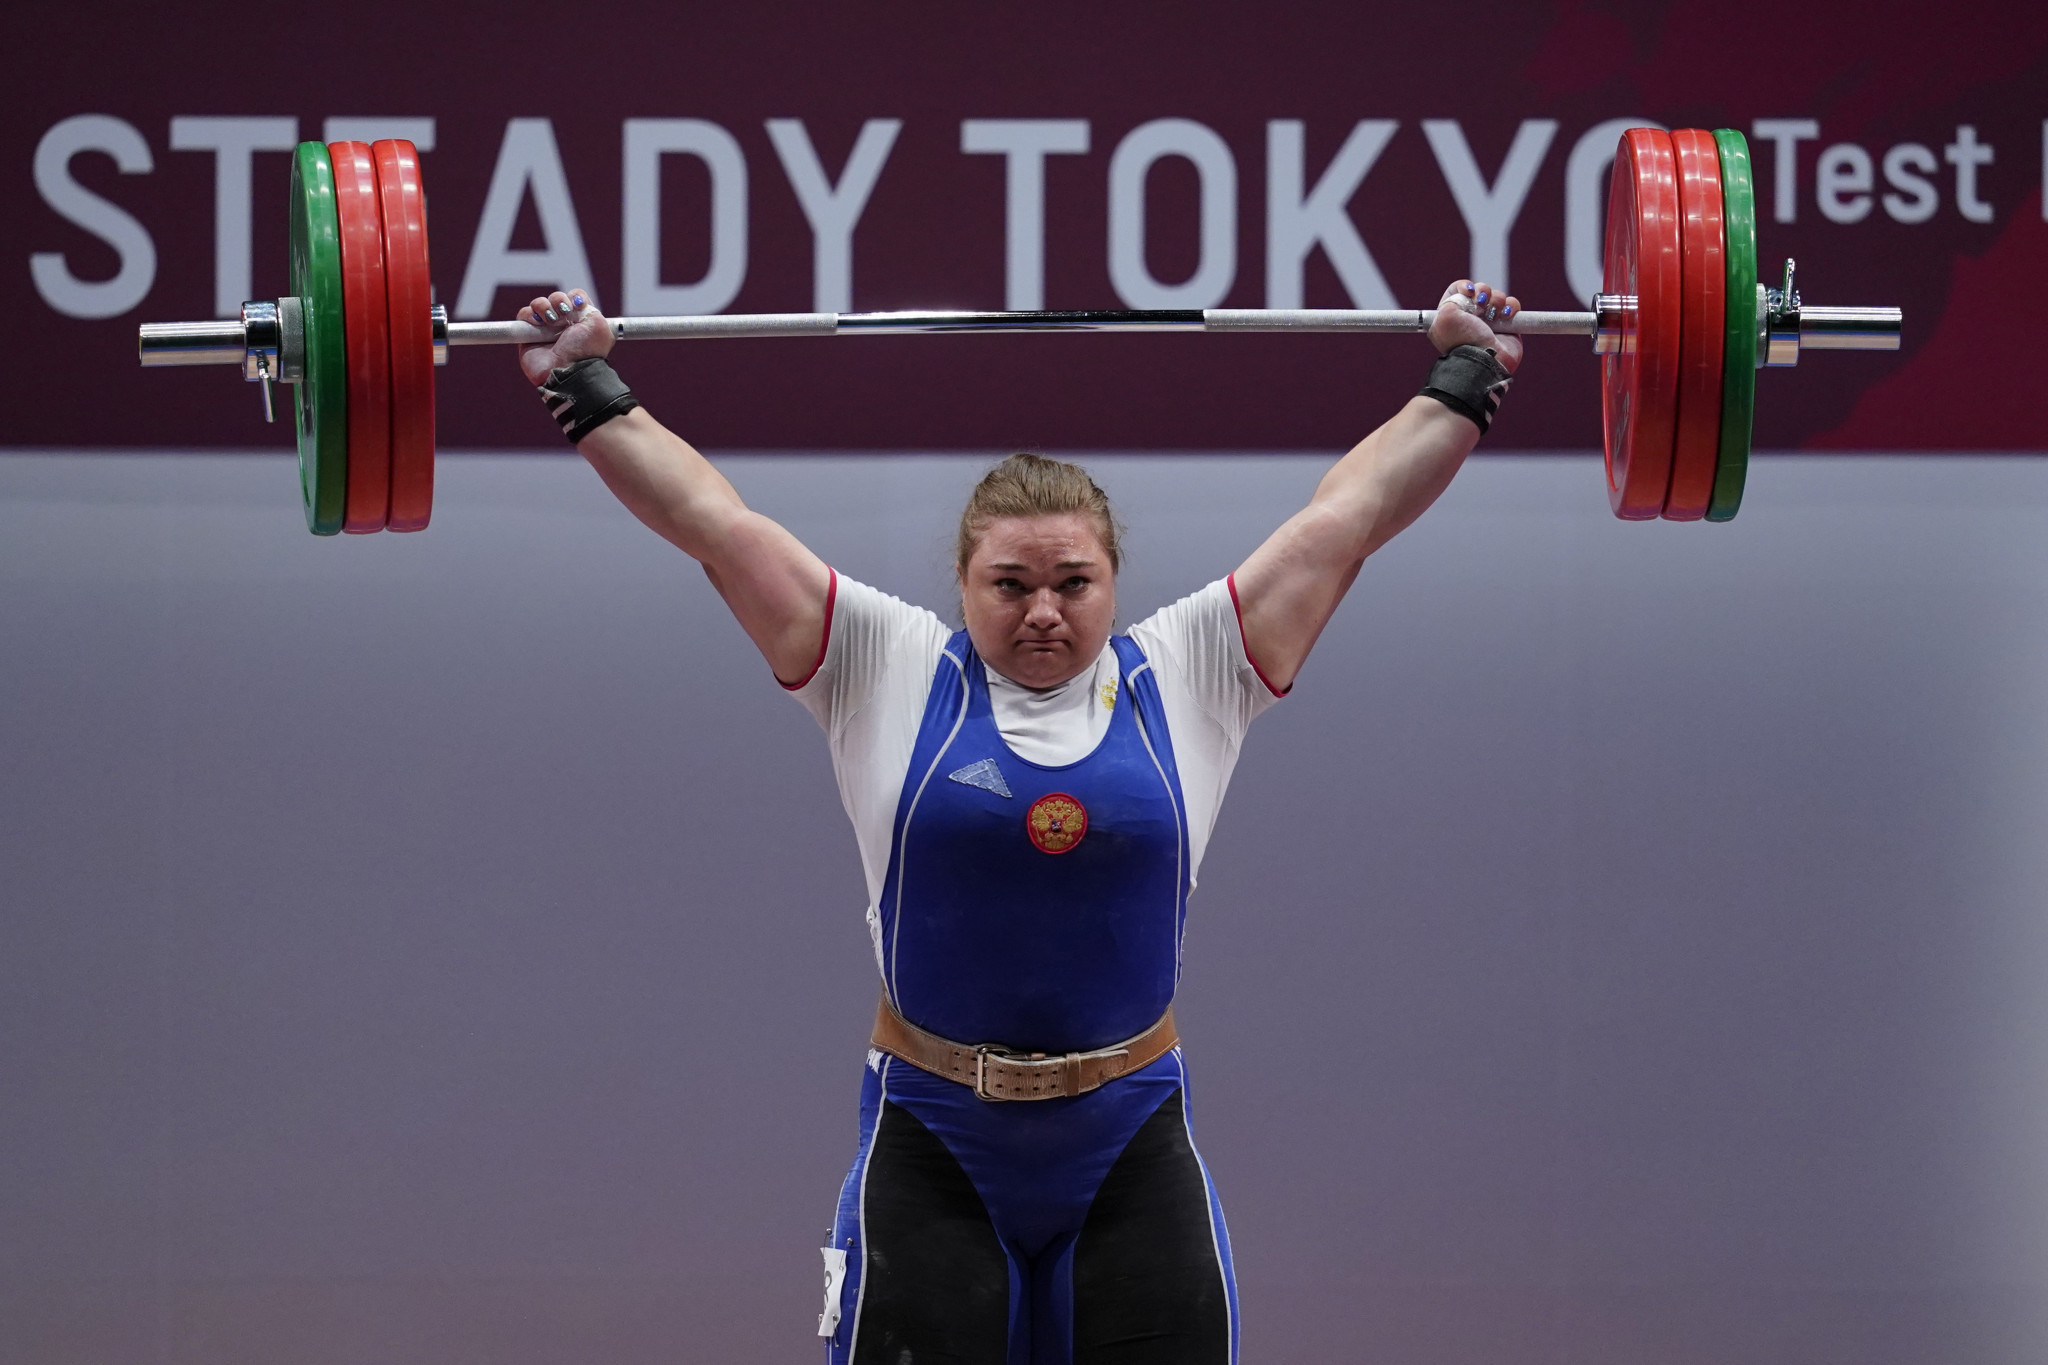 Russian Tatiana Kashirina leads the entries at 87 kilograms for the European Weightlifting Championships as things stand ©Getty Images